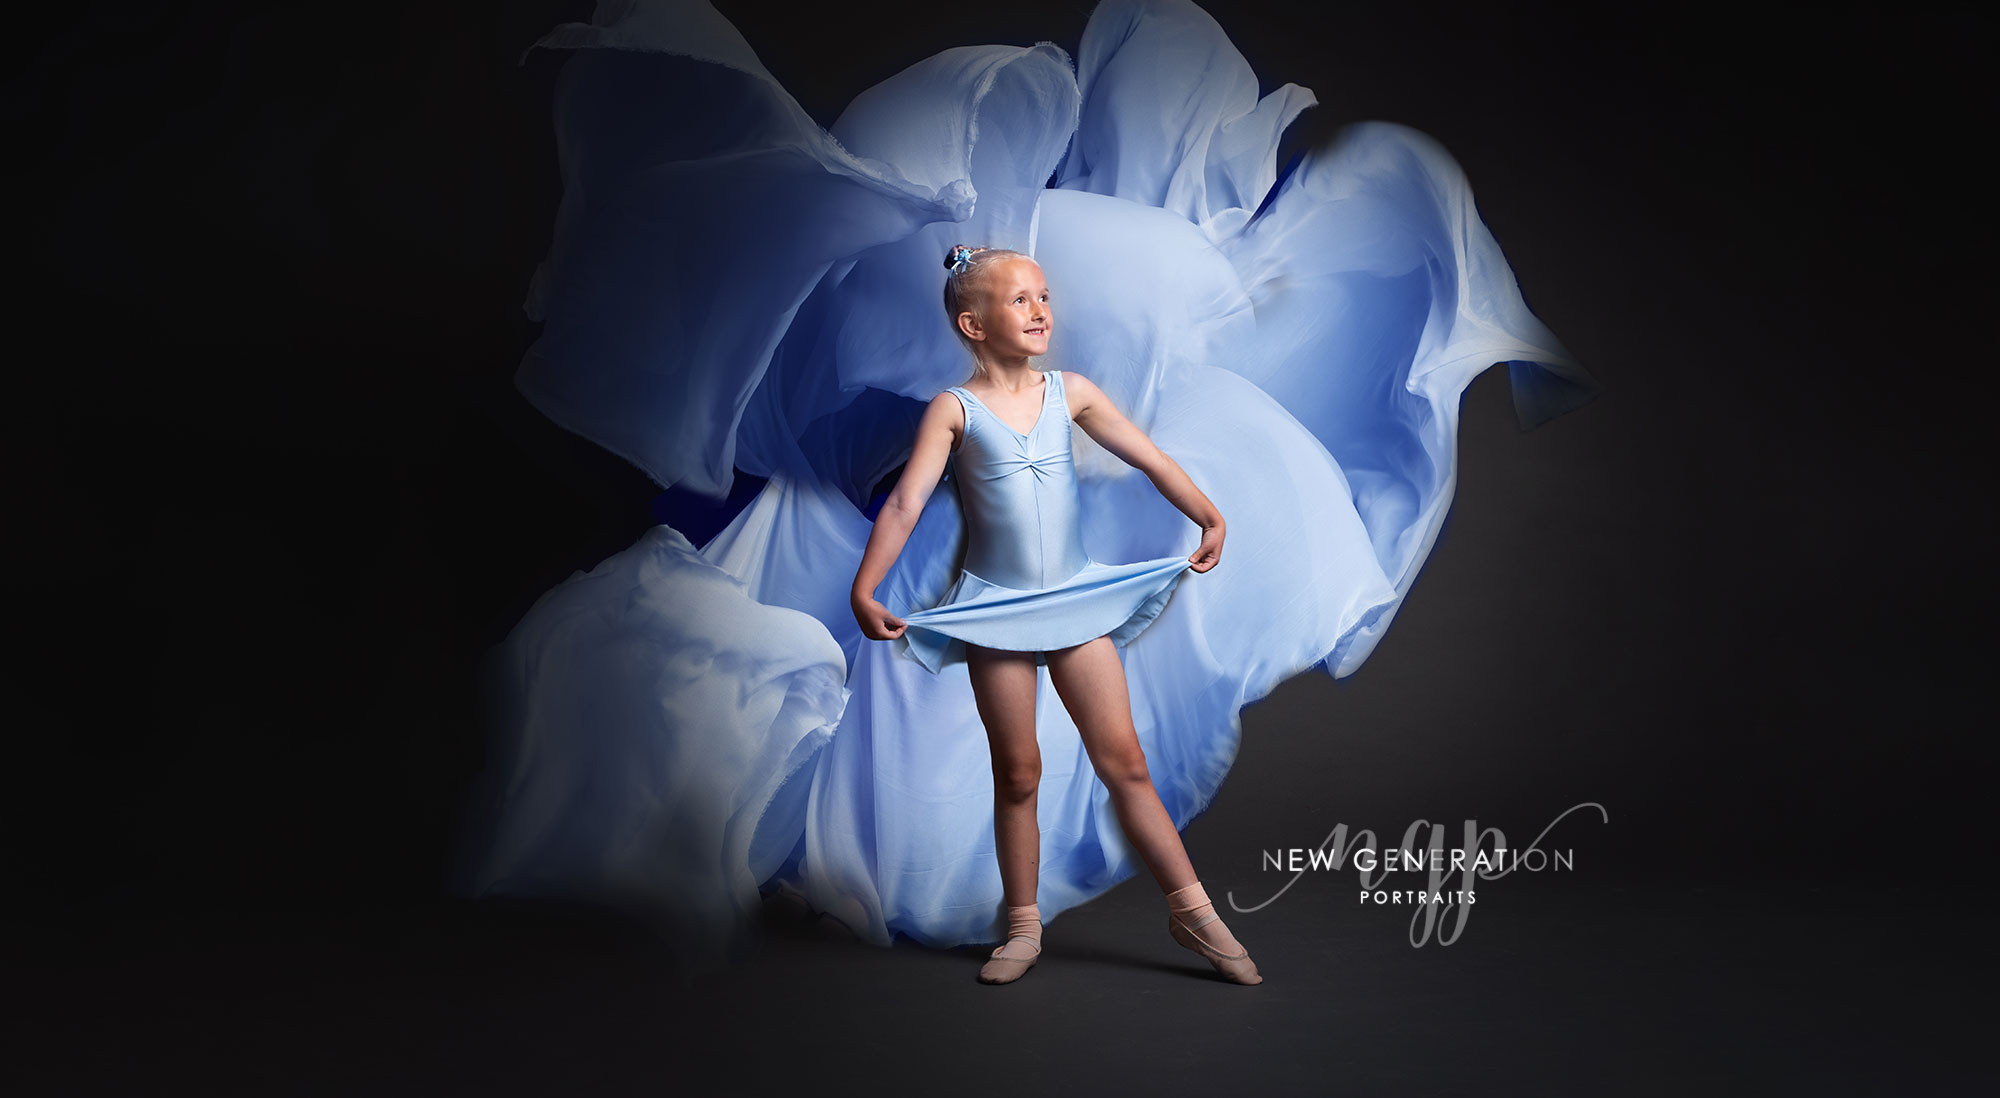 Little ballerina with blue cloud of material being her. Captured by New Generation Portraits